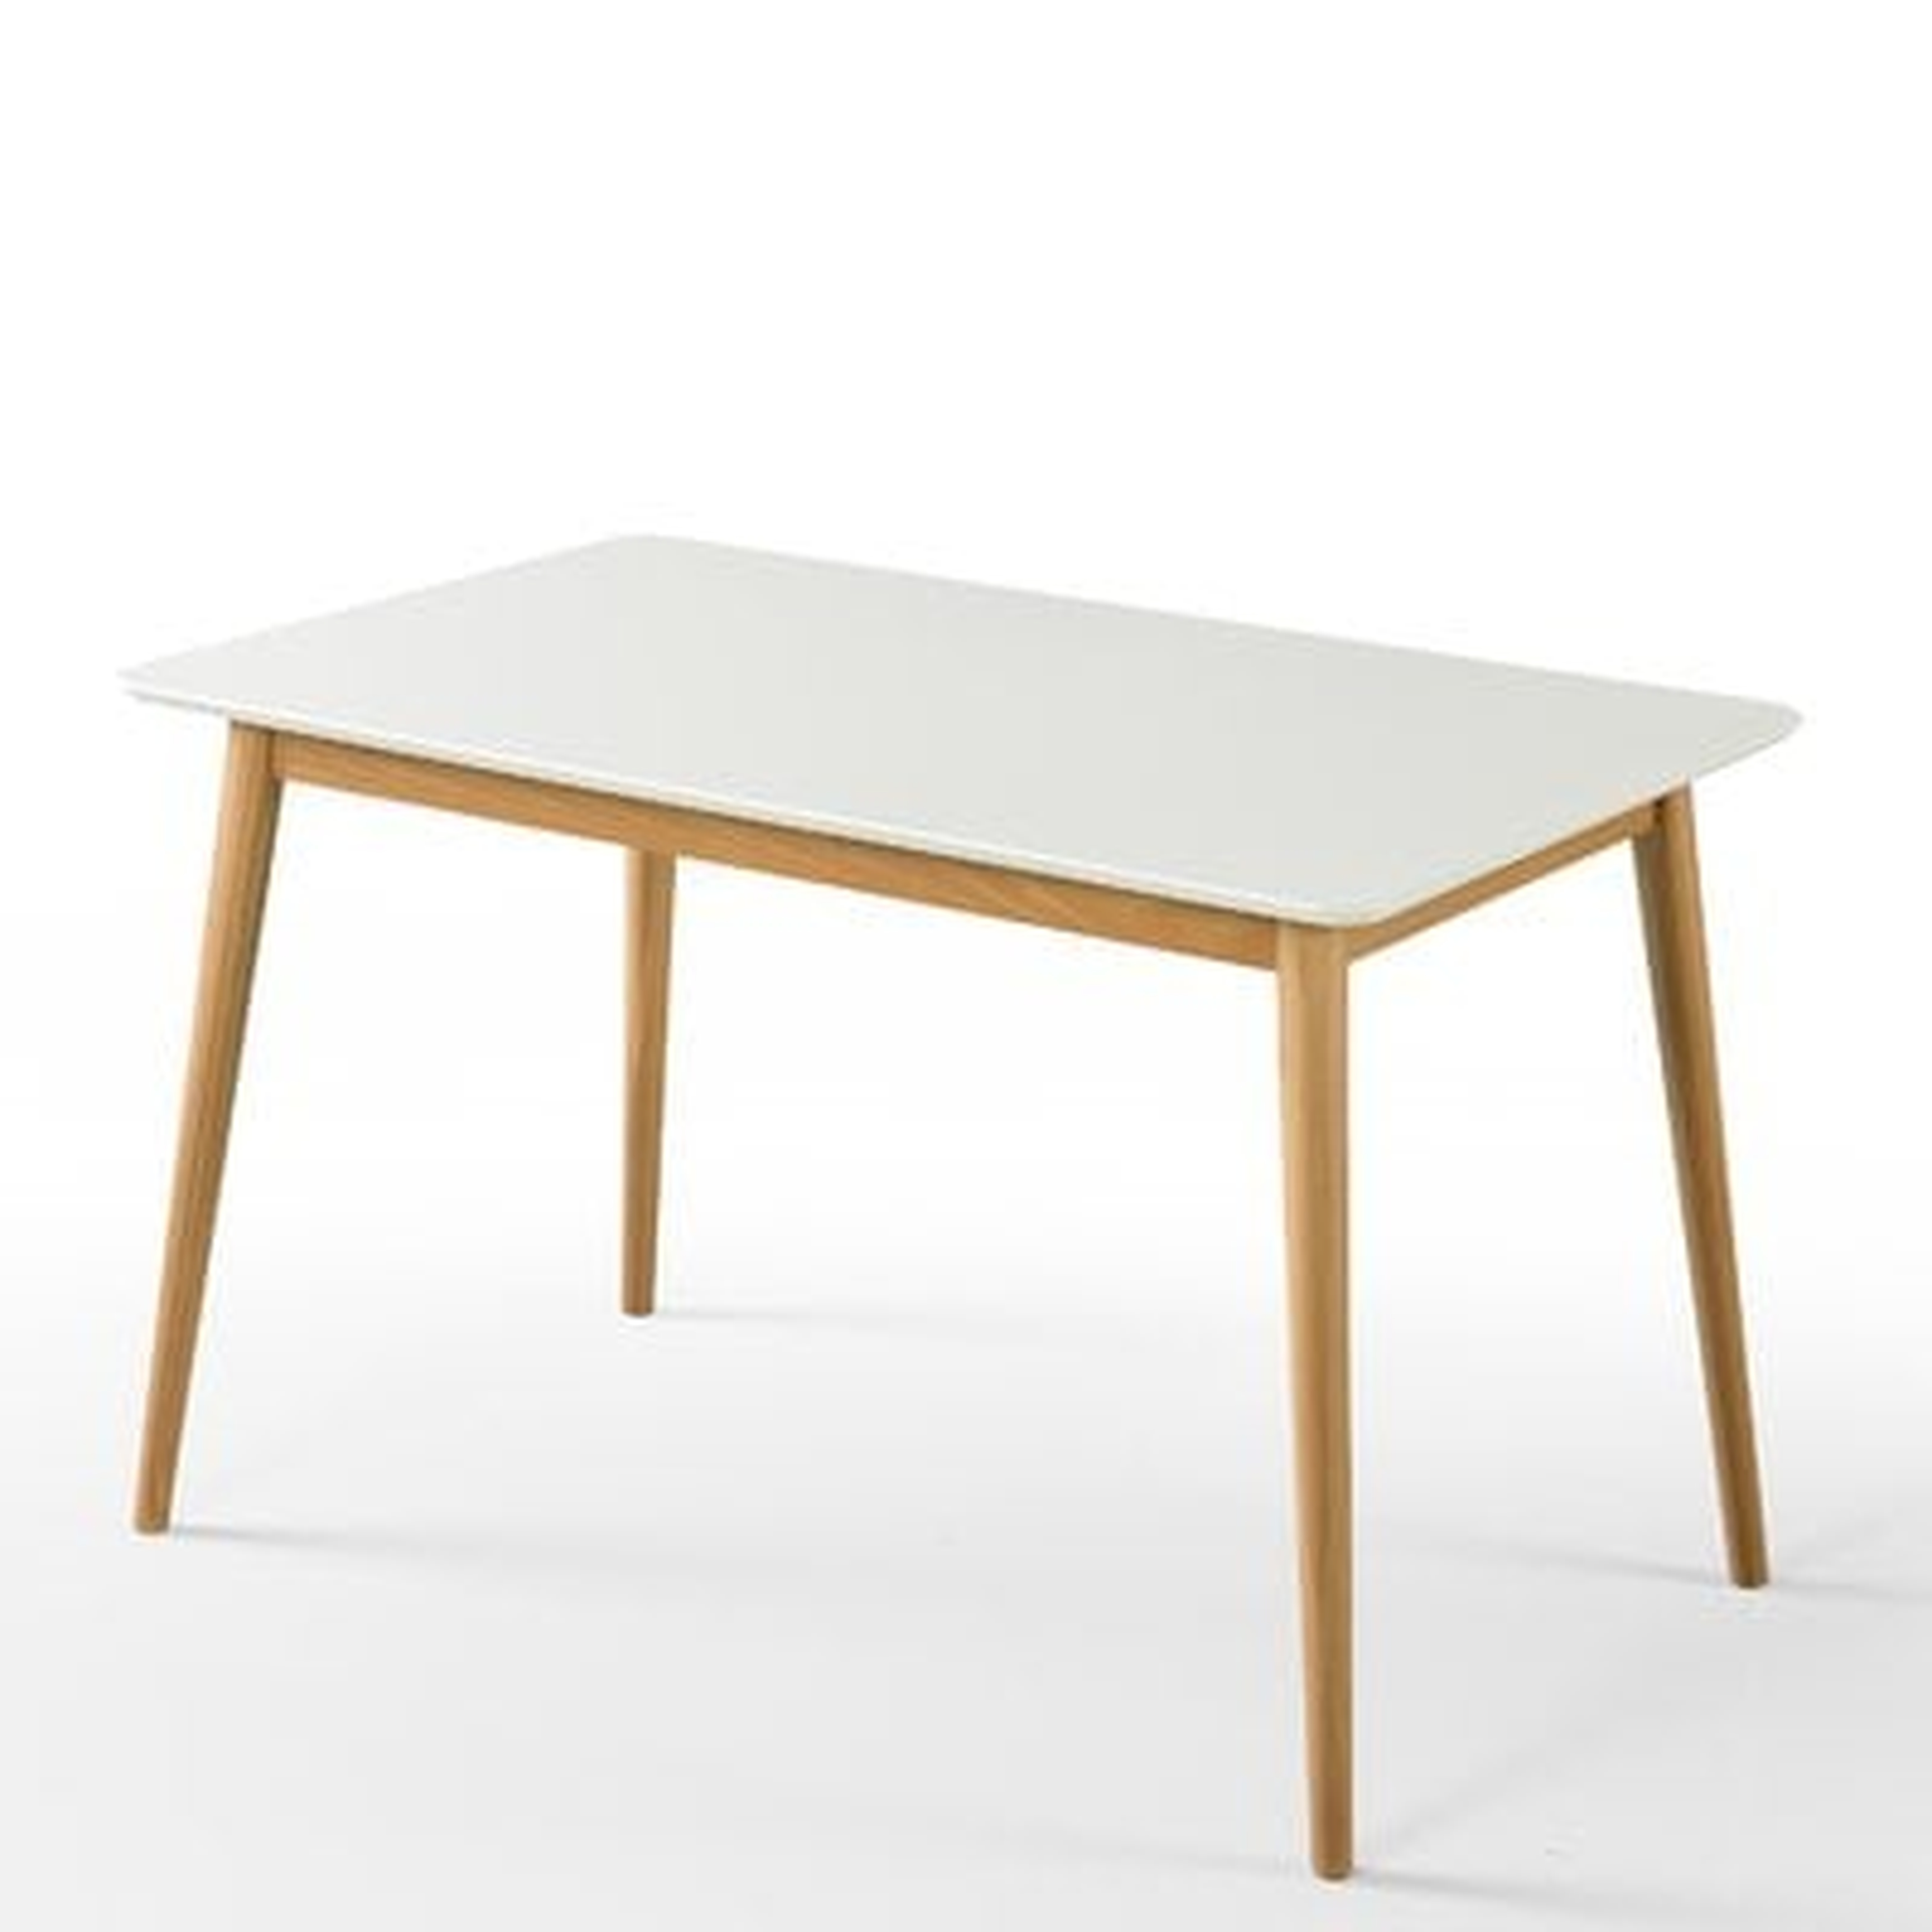 Bedwell Mid Century Wood Dining Table - Wayfair